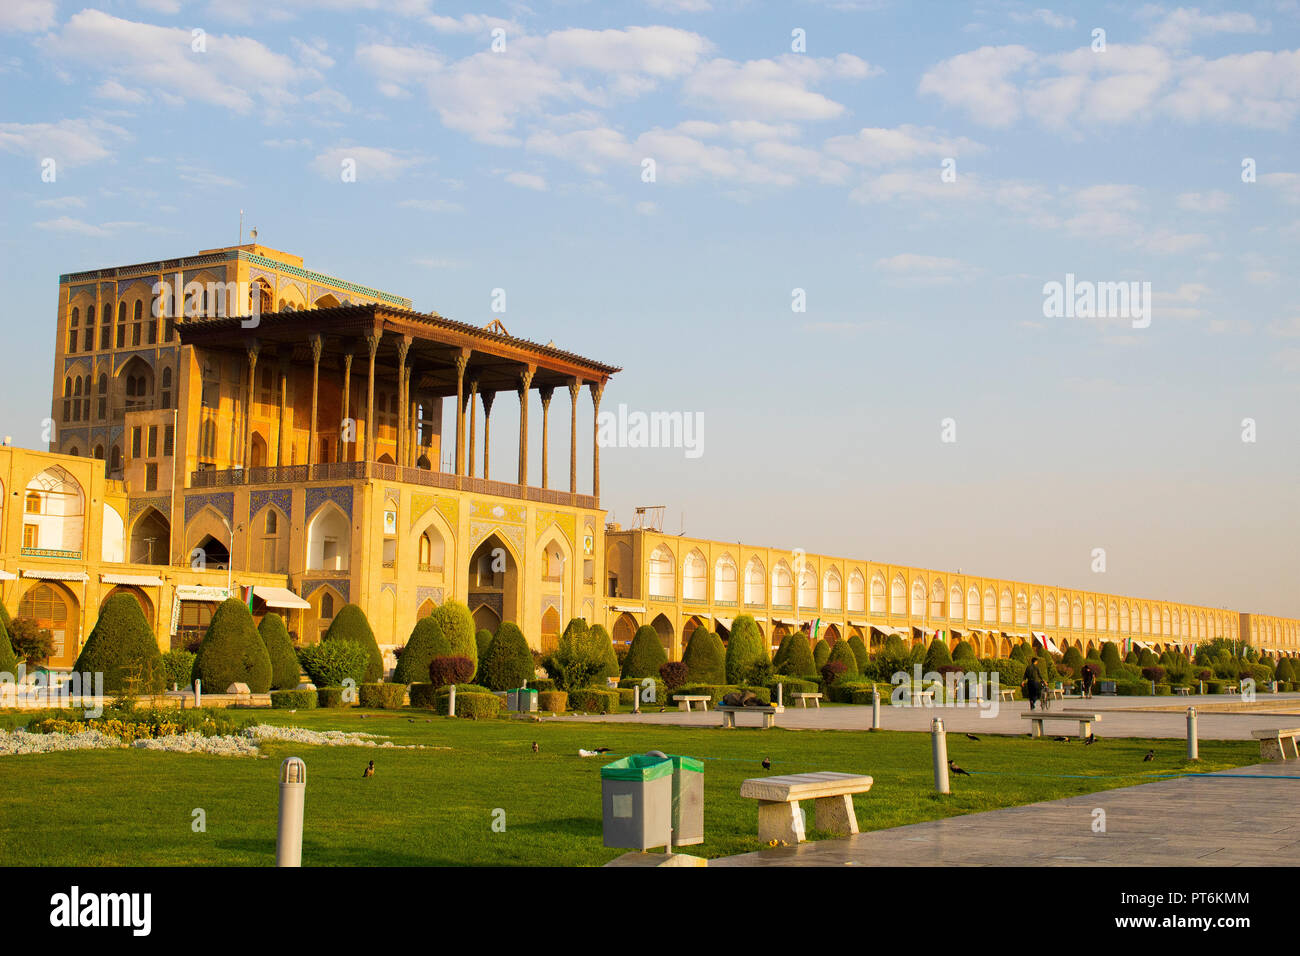 A historical place in Iran is Naghshe Jahan square. Stock Photo